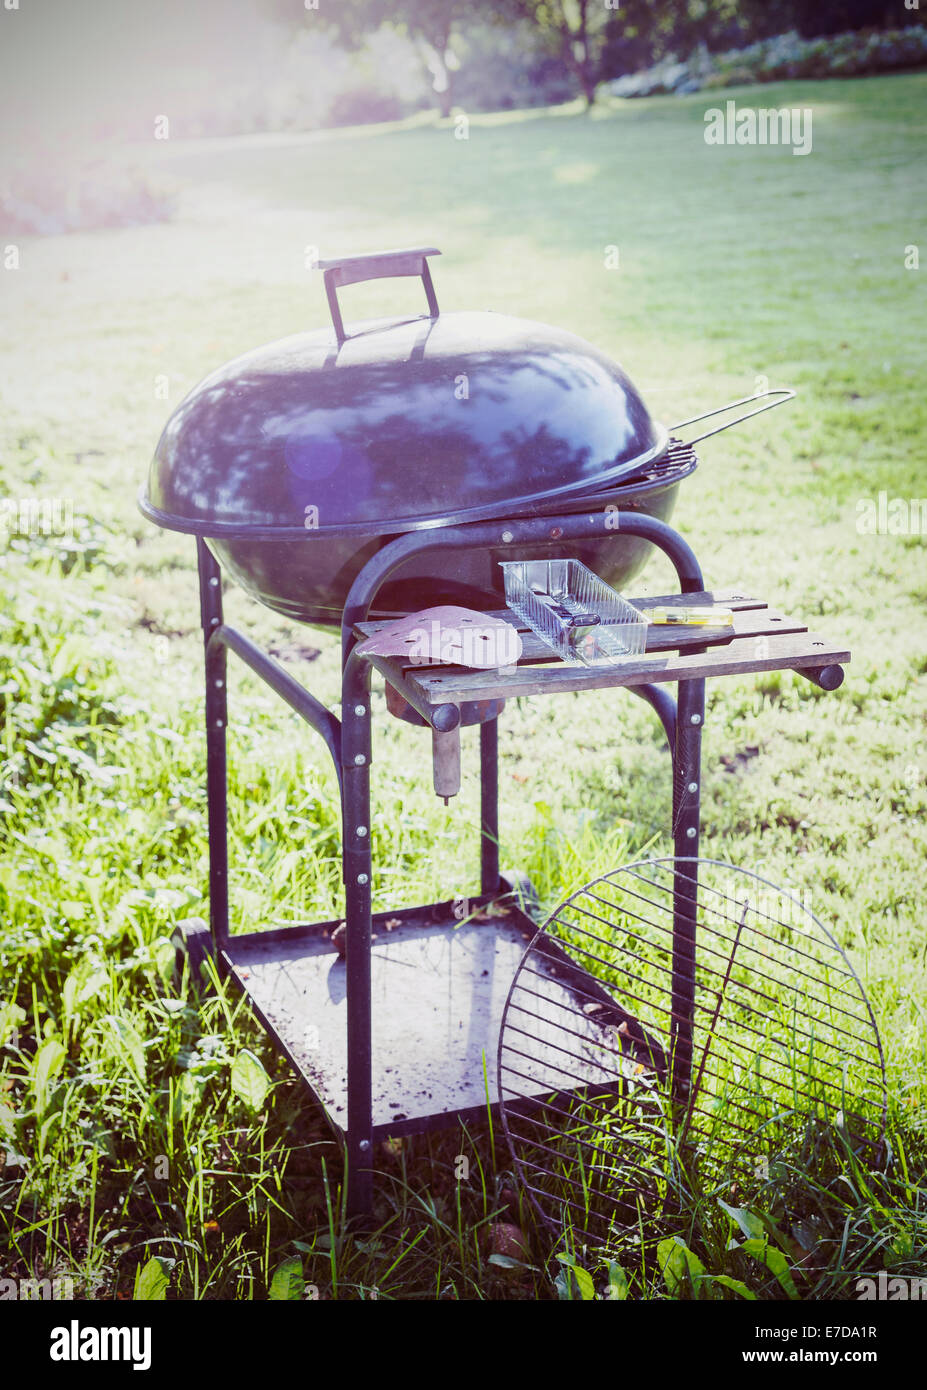 Vintage picture of old metal barbecue in the summer garden. Stock Photo